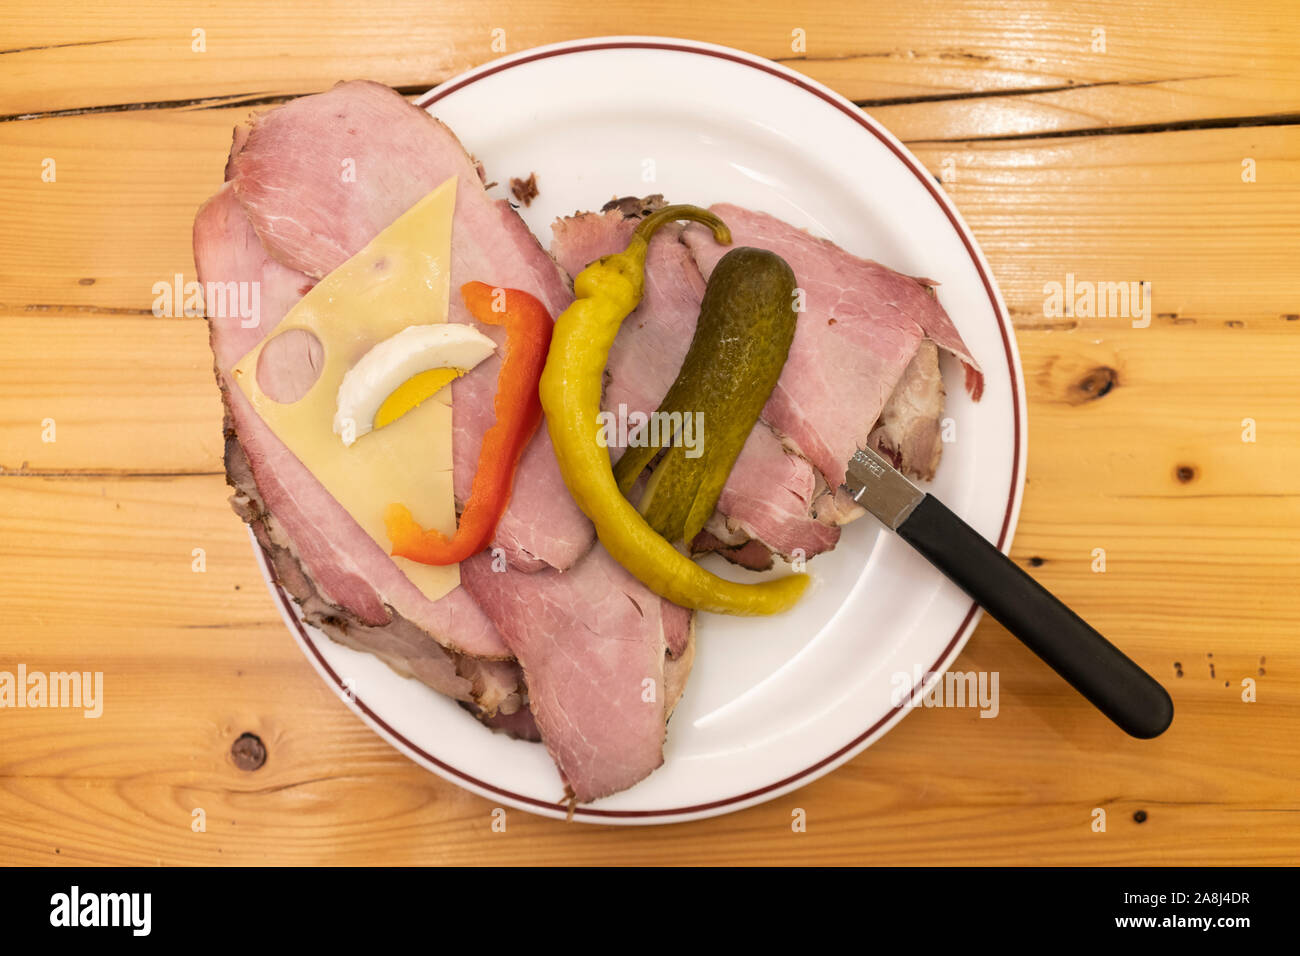 A Belegtes Brot (bread with ham and cheese) on a plate served at a Heuriger in Lower Austria. The food is simple and a typical dish of the area Stock Photo